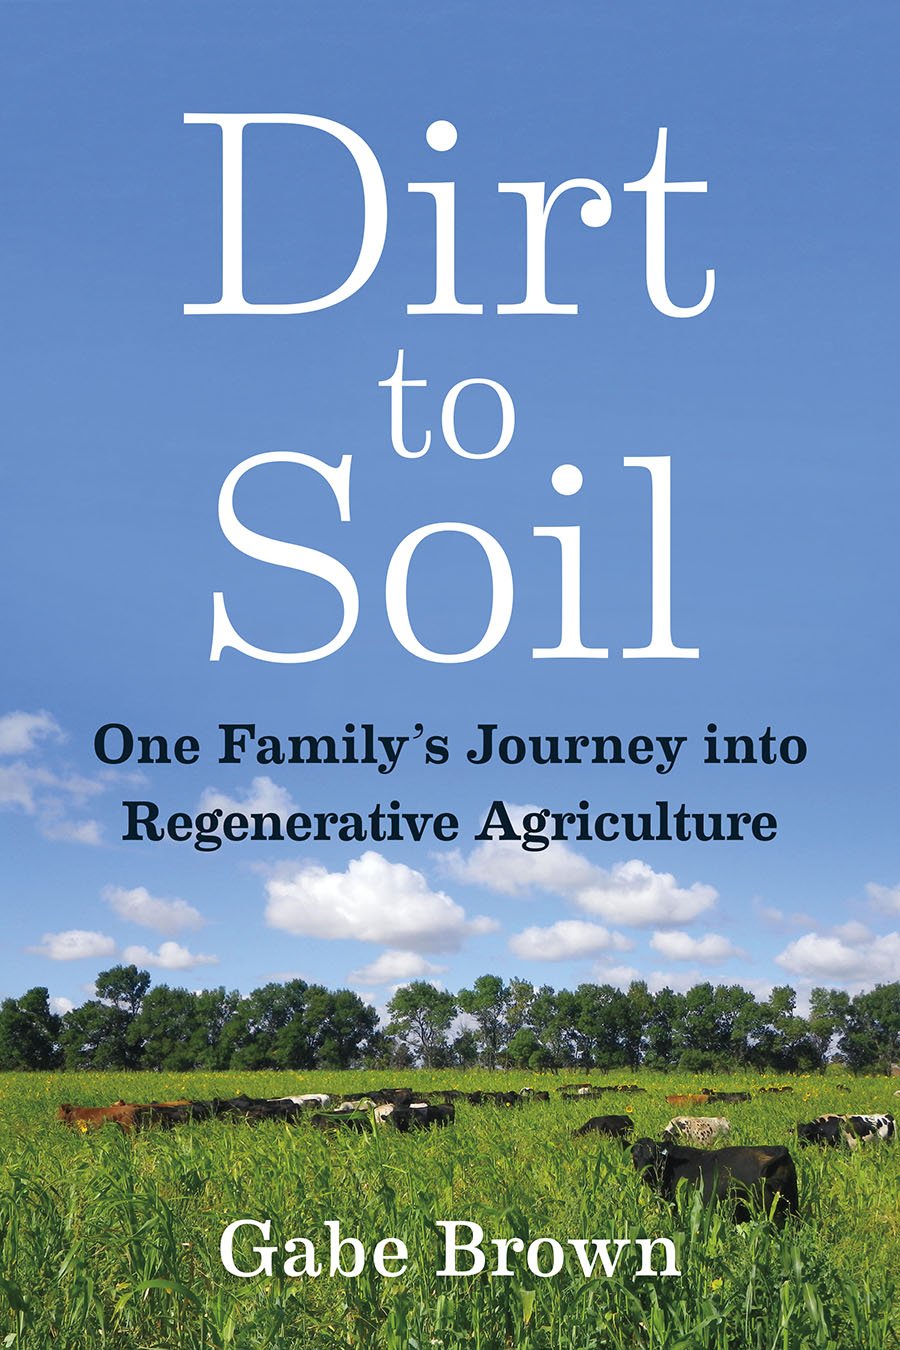 The Dirt to Soil cover